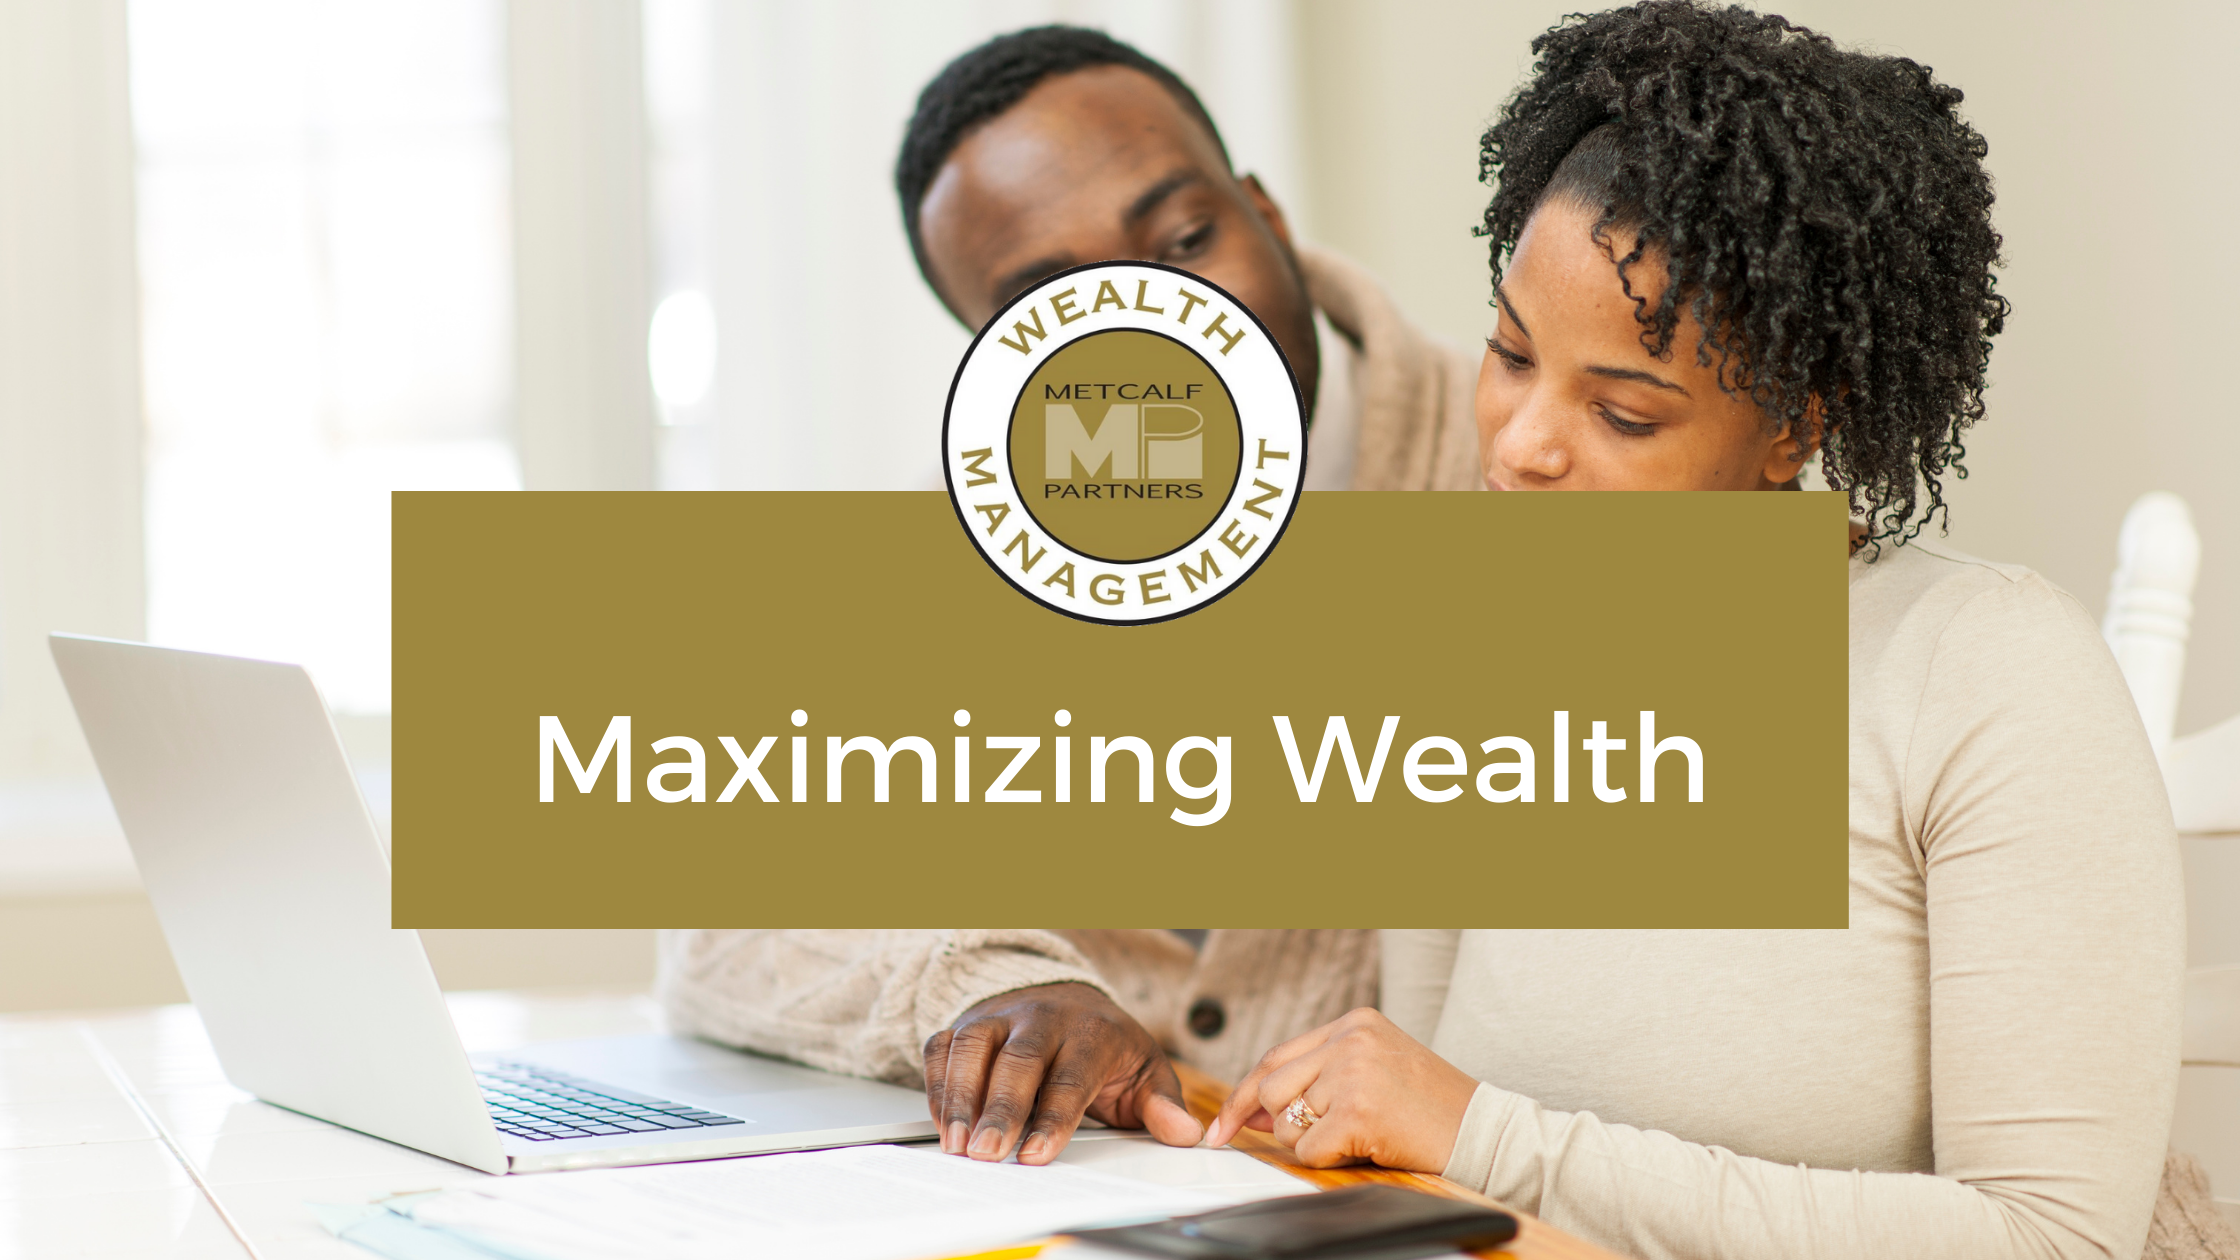 Featured image for “Maximizing Wealth: 5 Ways a Financial Professional May Help Propel High Earners Towards High-Net-Worth Status”